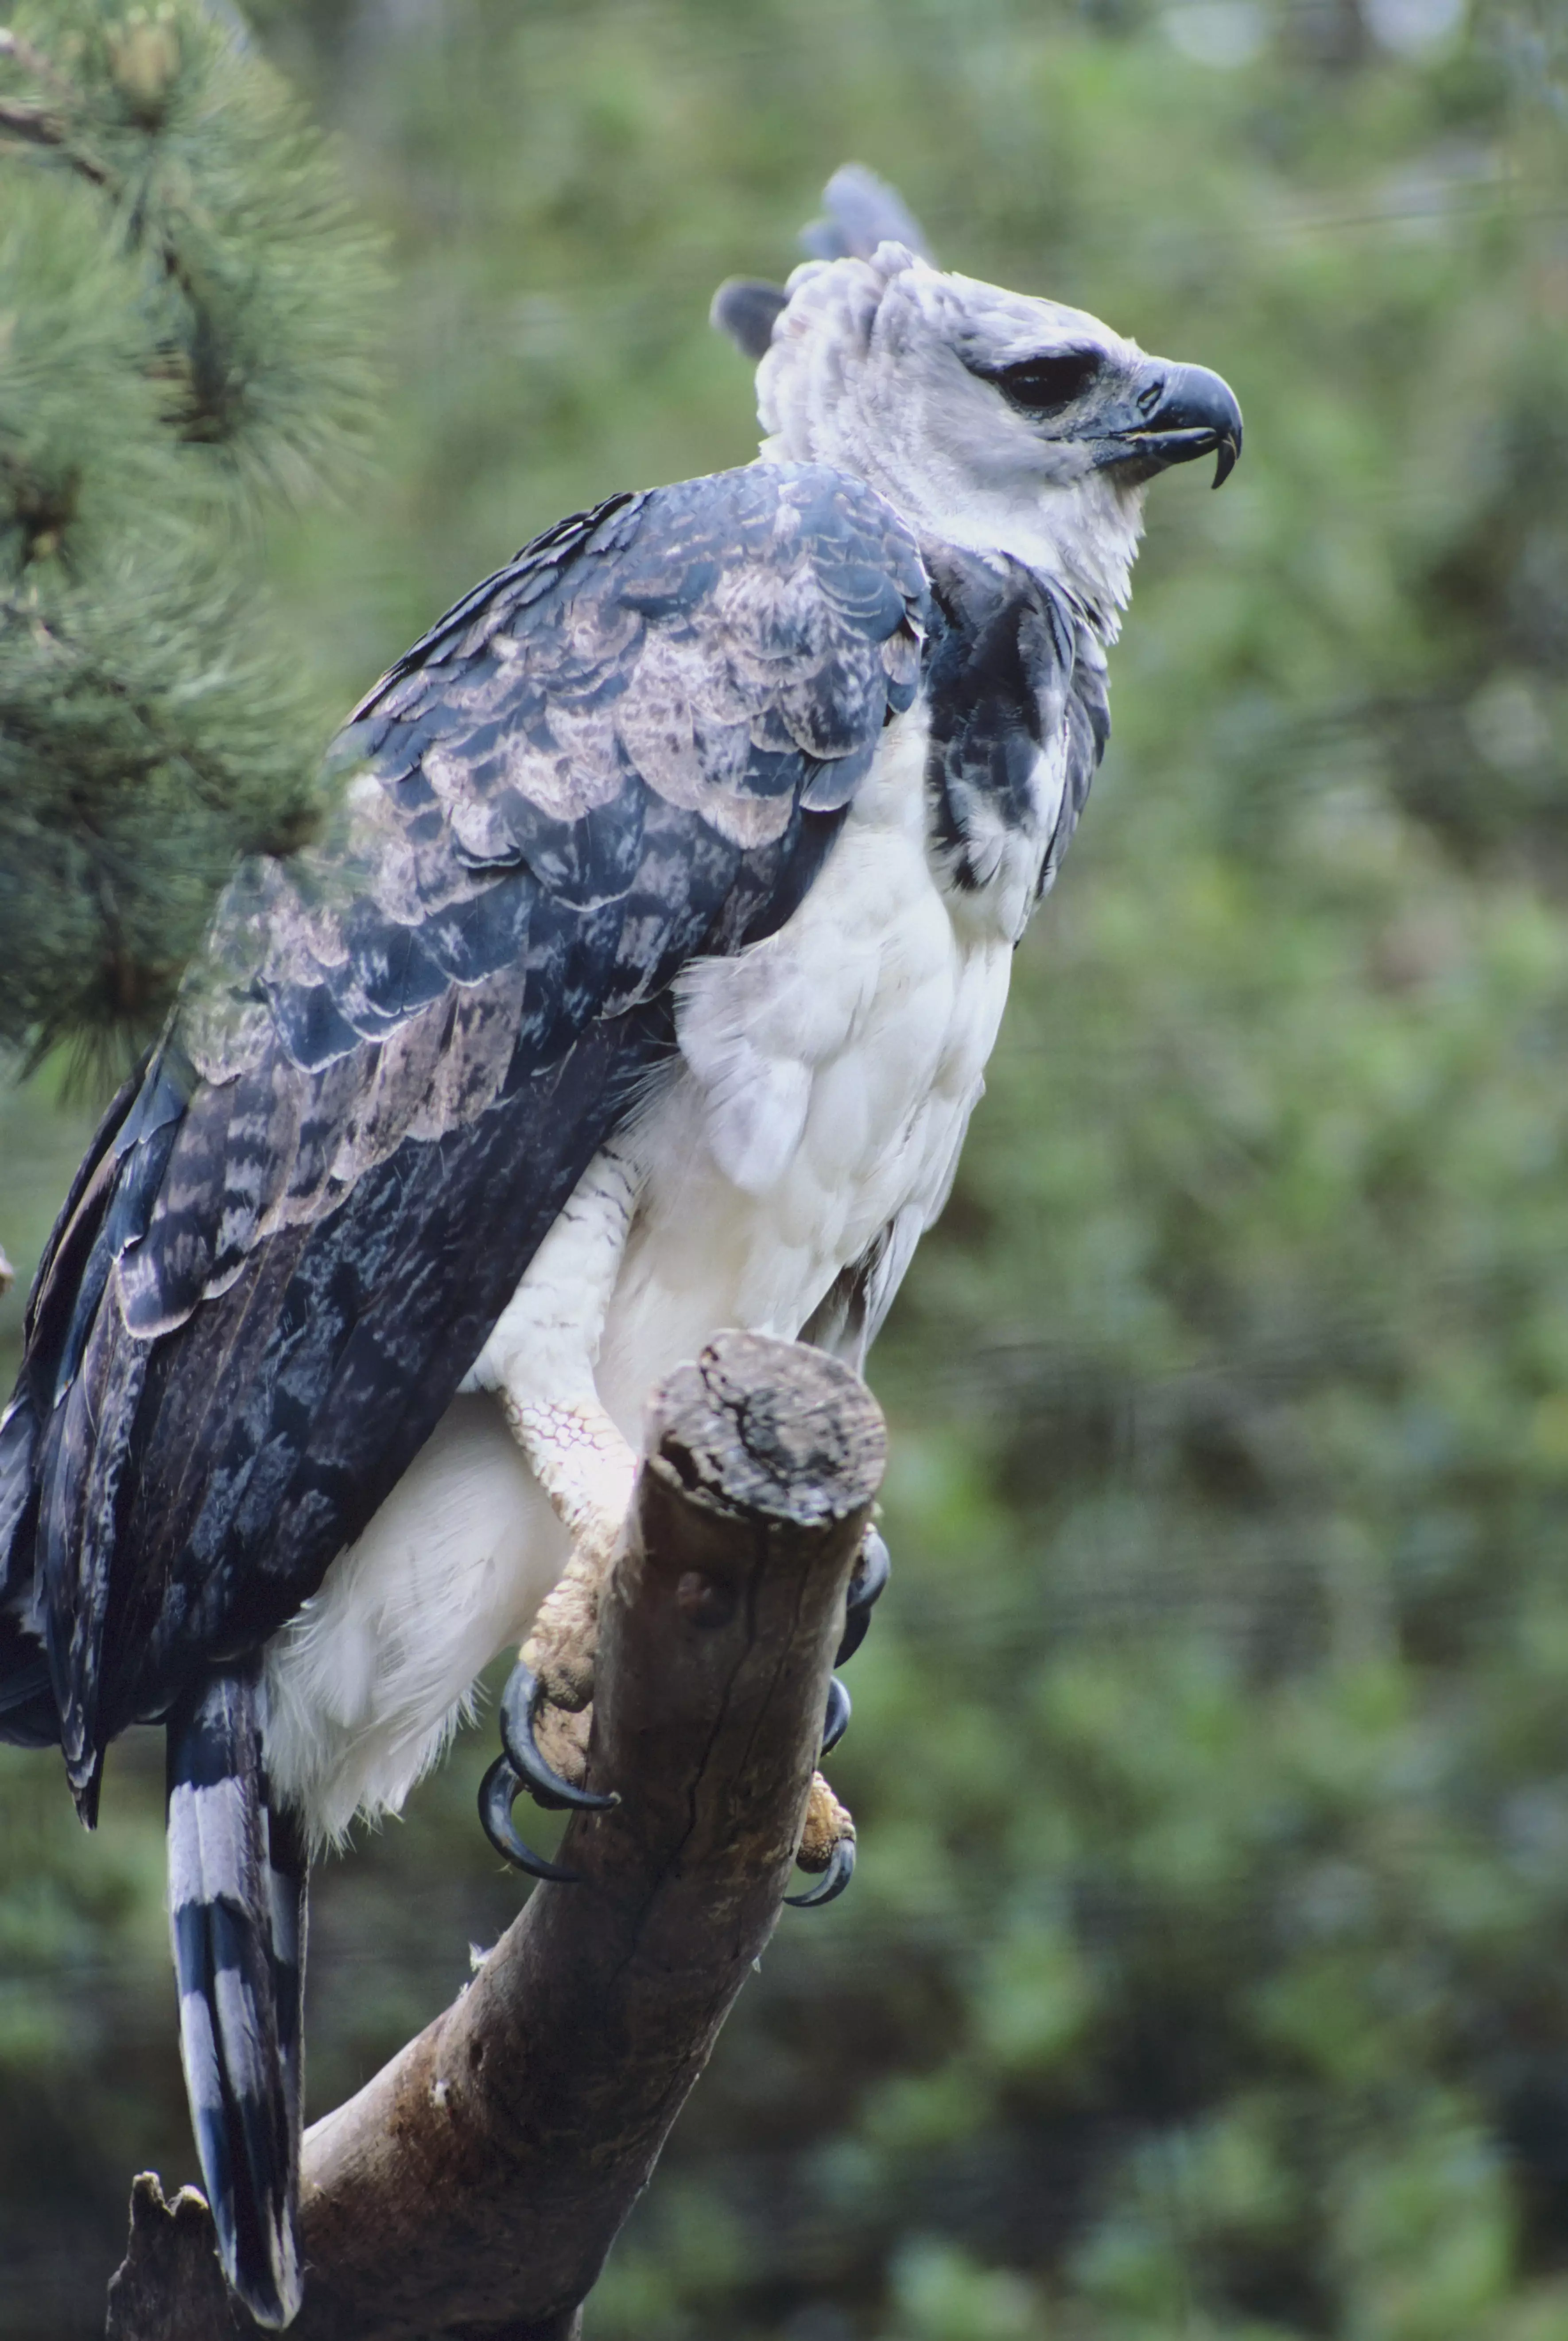 Stock image of a harpy eagle.